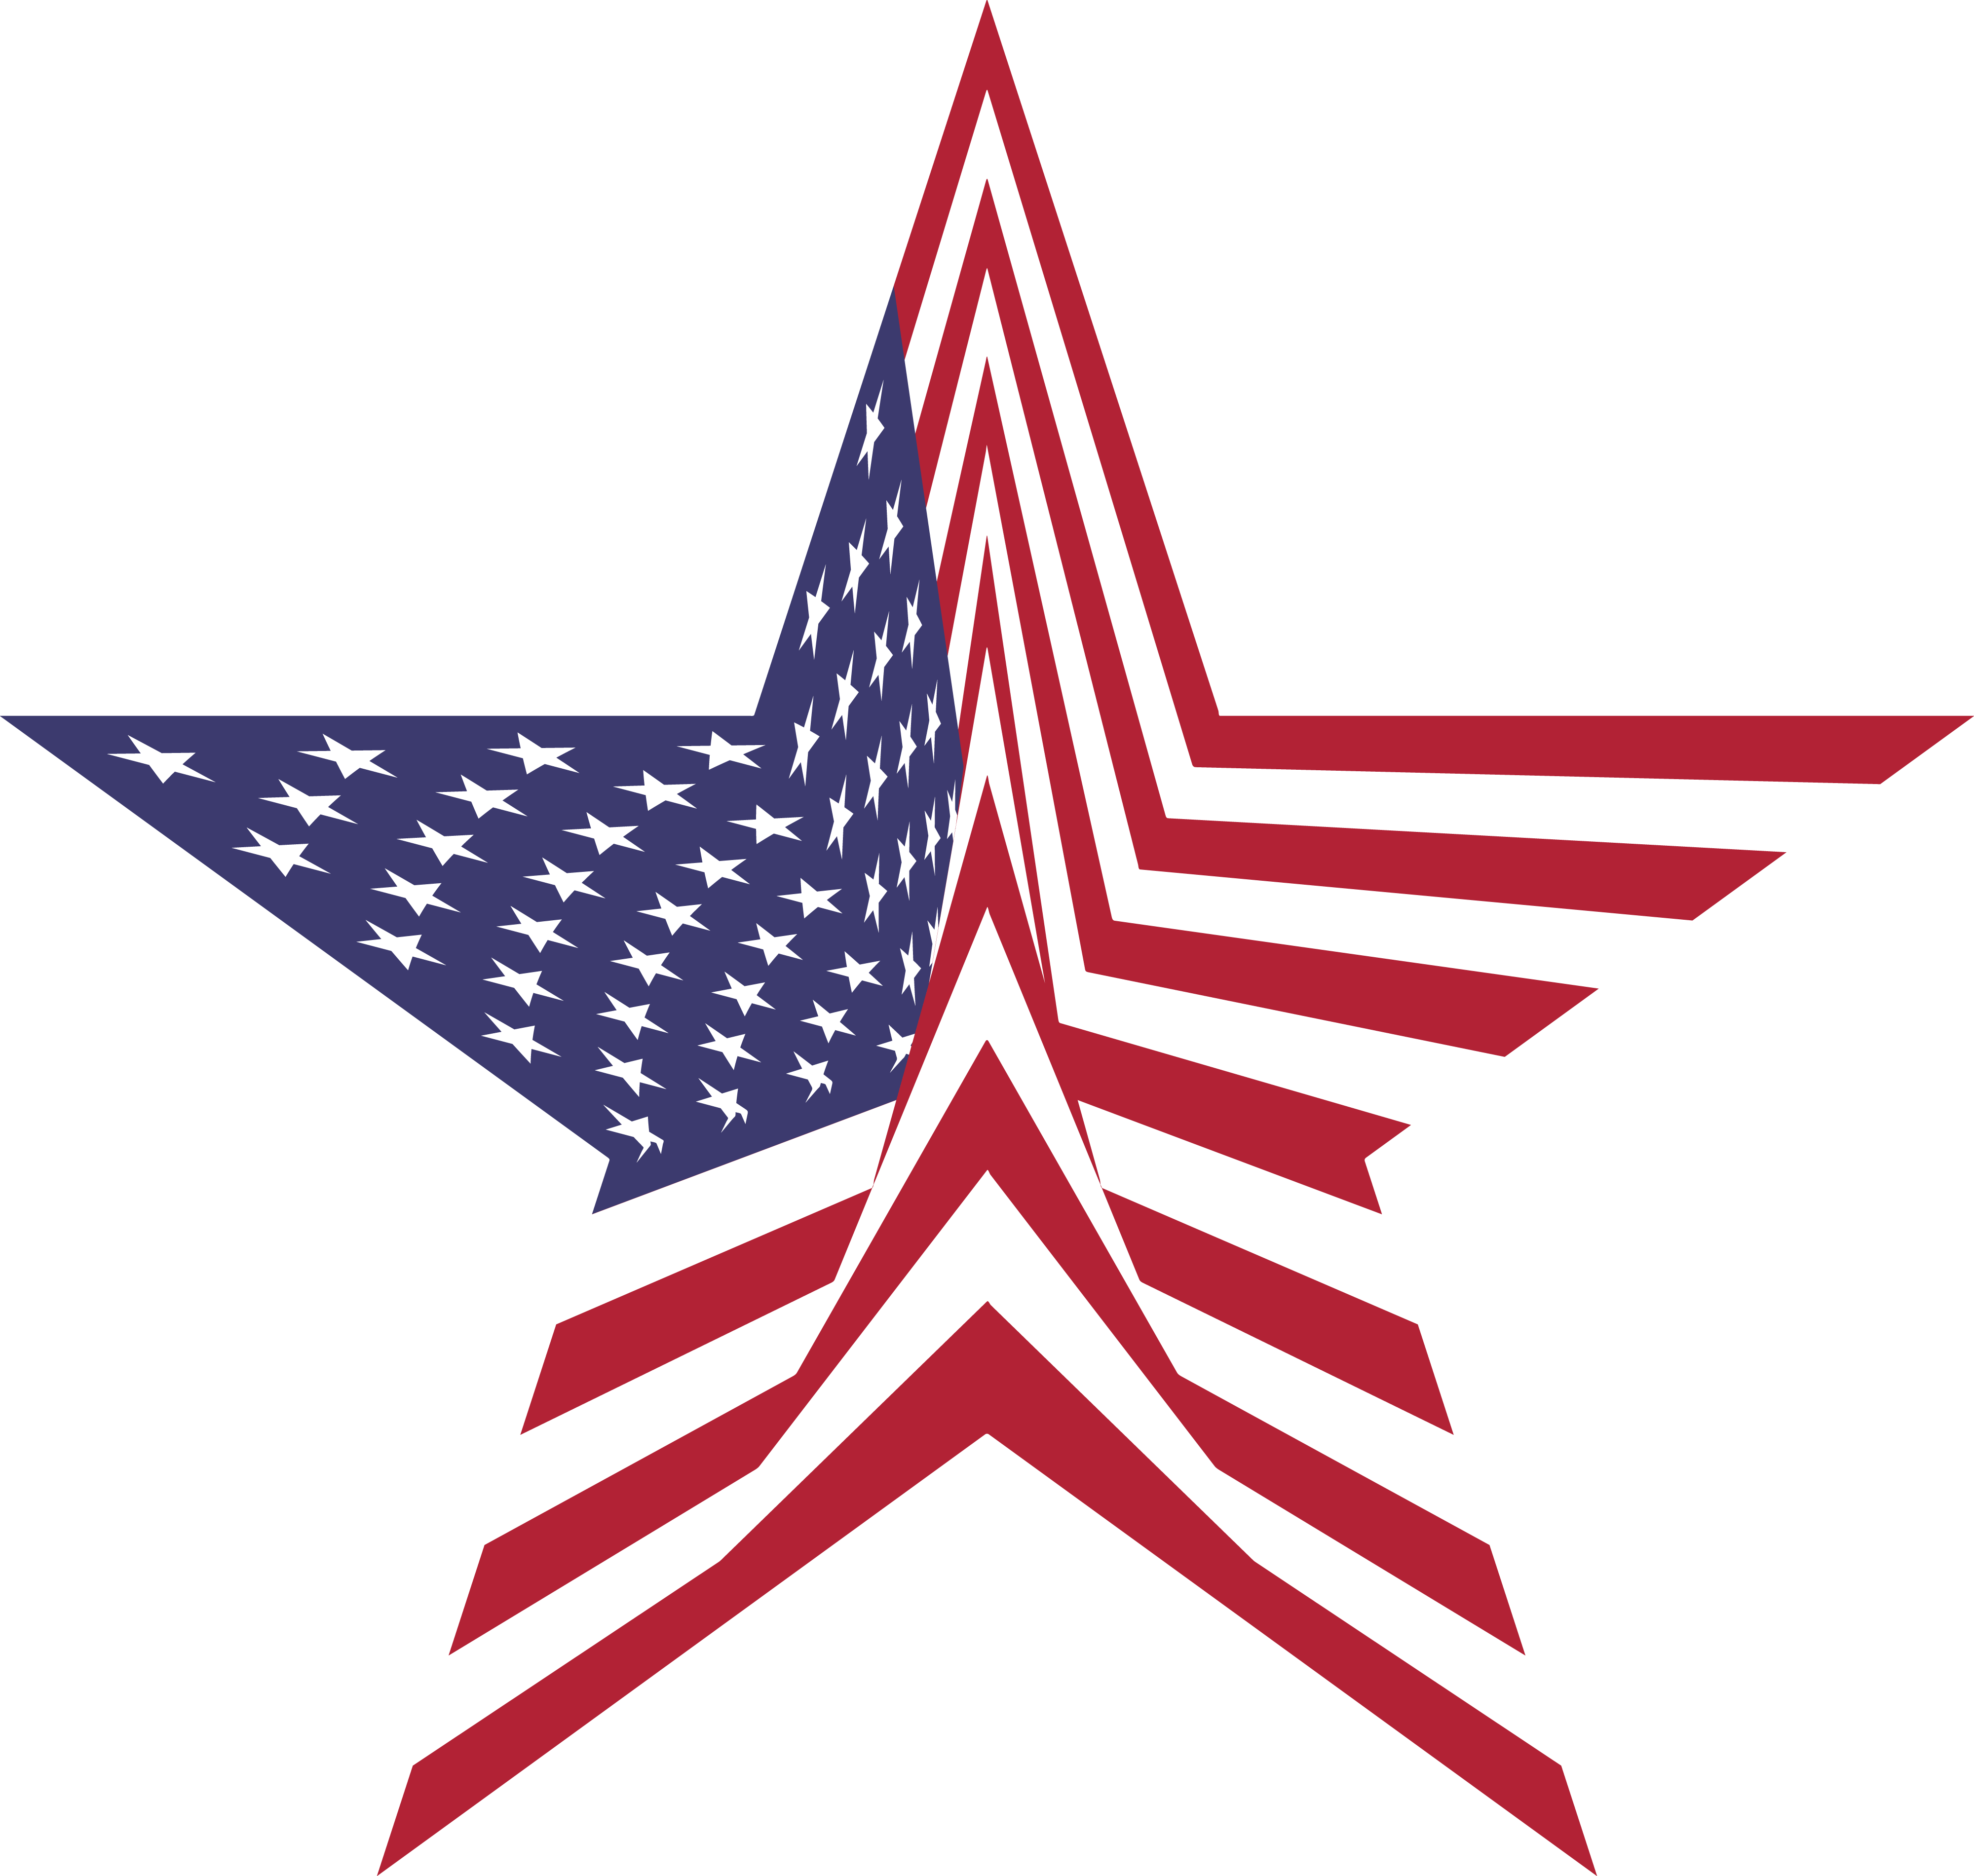 Download Free Clipart Of A star with an american flag pattern